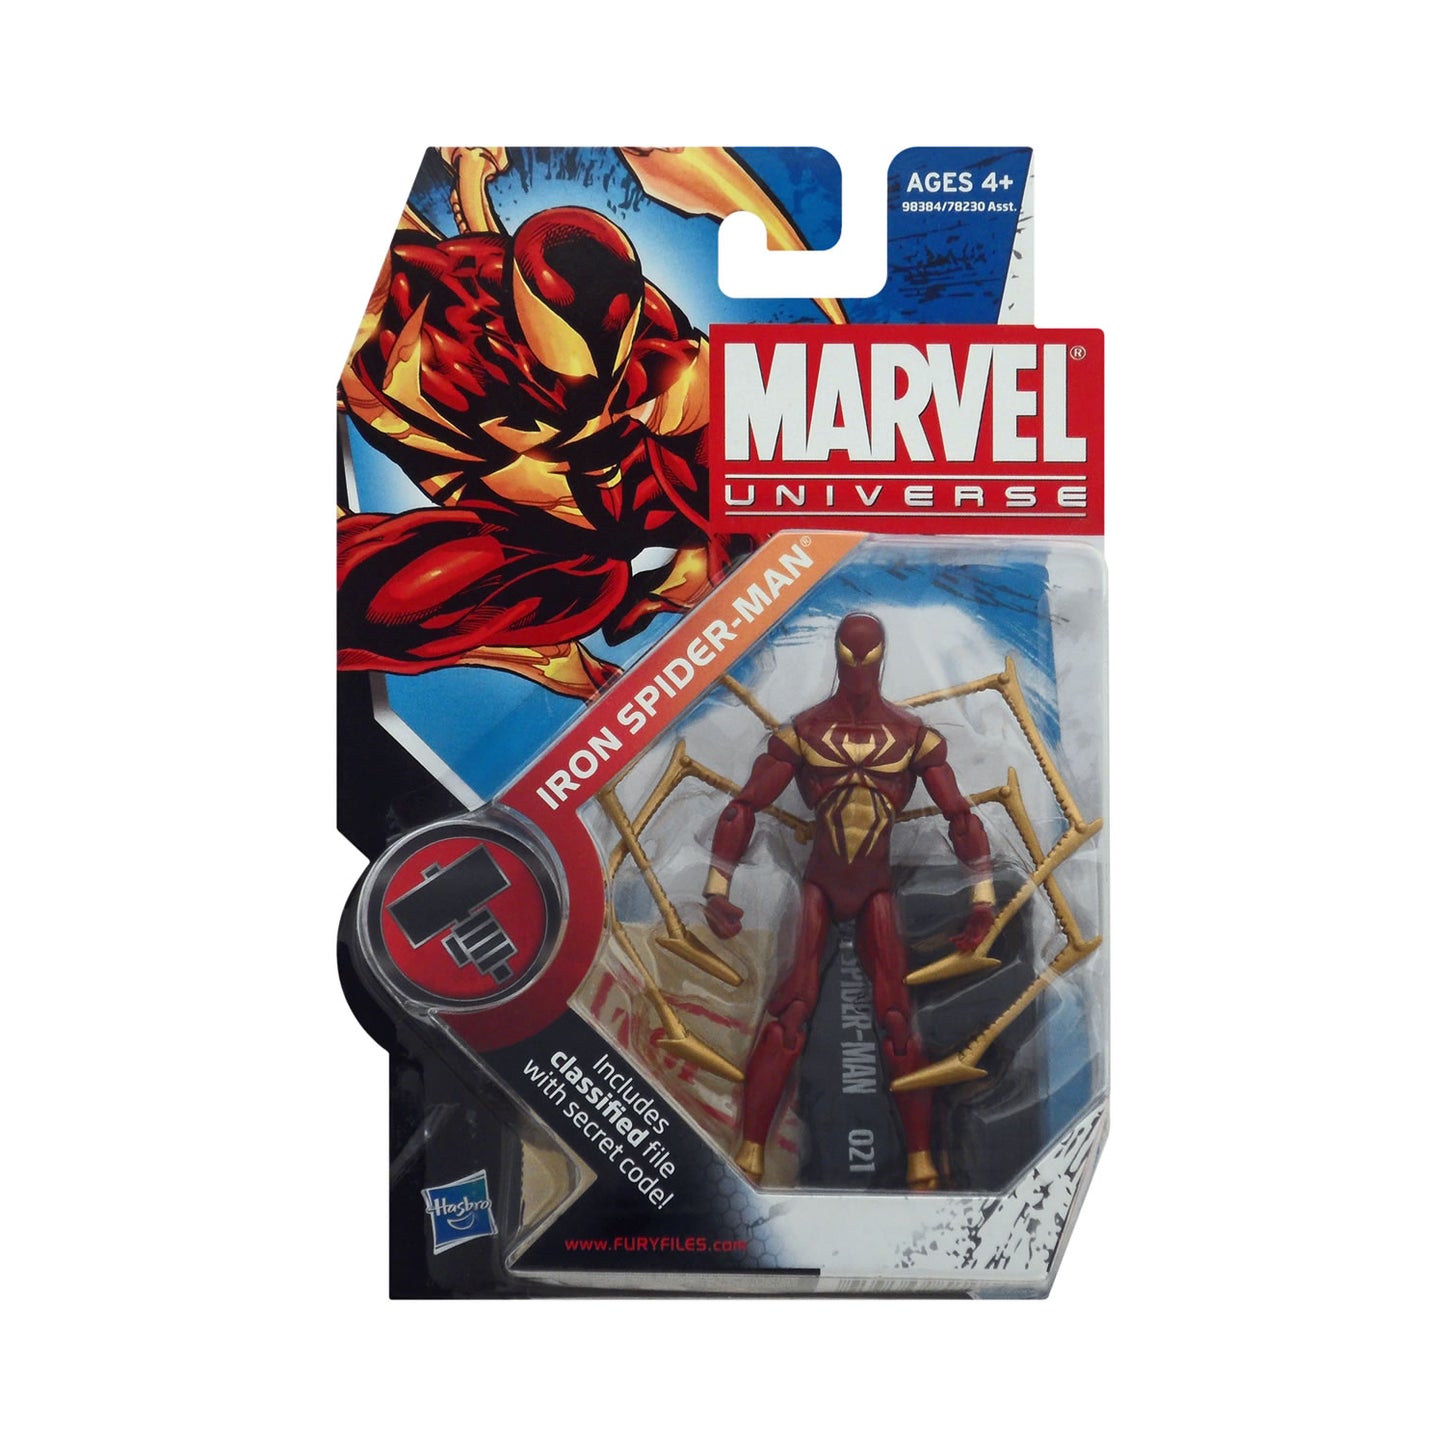 Marvel Universe Series 2 Figure 21 Iron Spider-Man (Solid) 3.75-Inch Action Figure